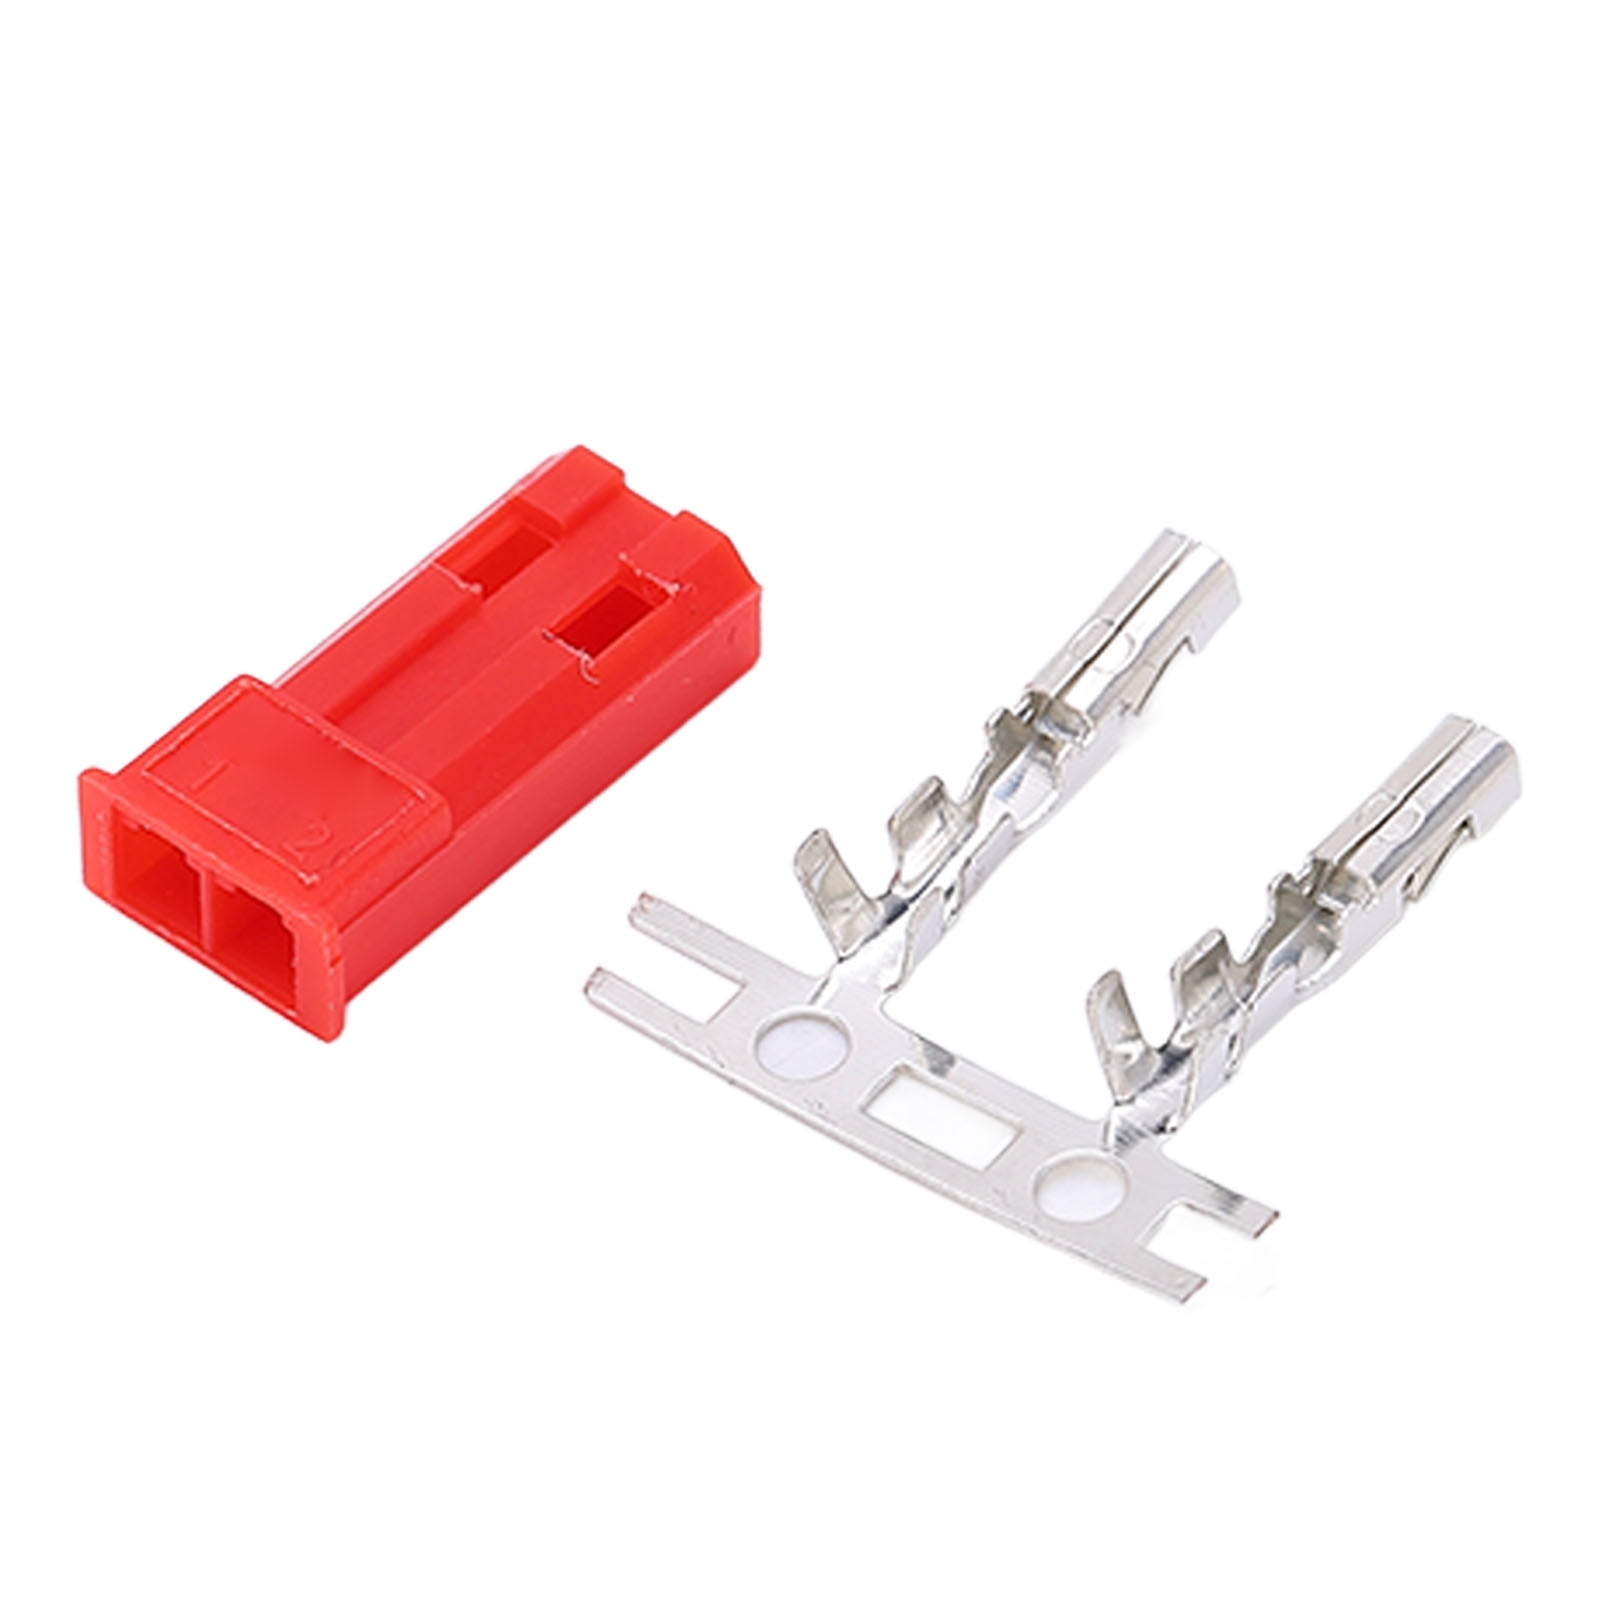 JST Li-PO battery 2 pin male female red connector housing crimp contact pin x 20